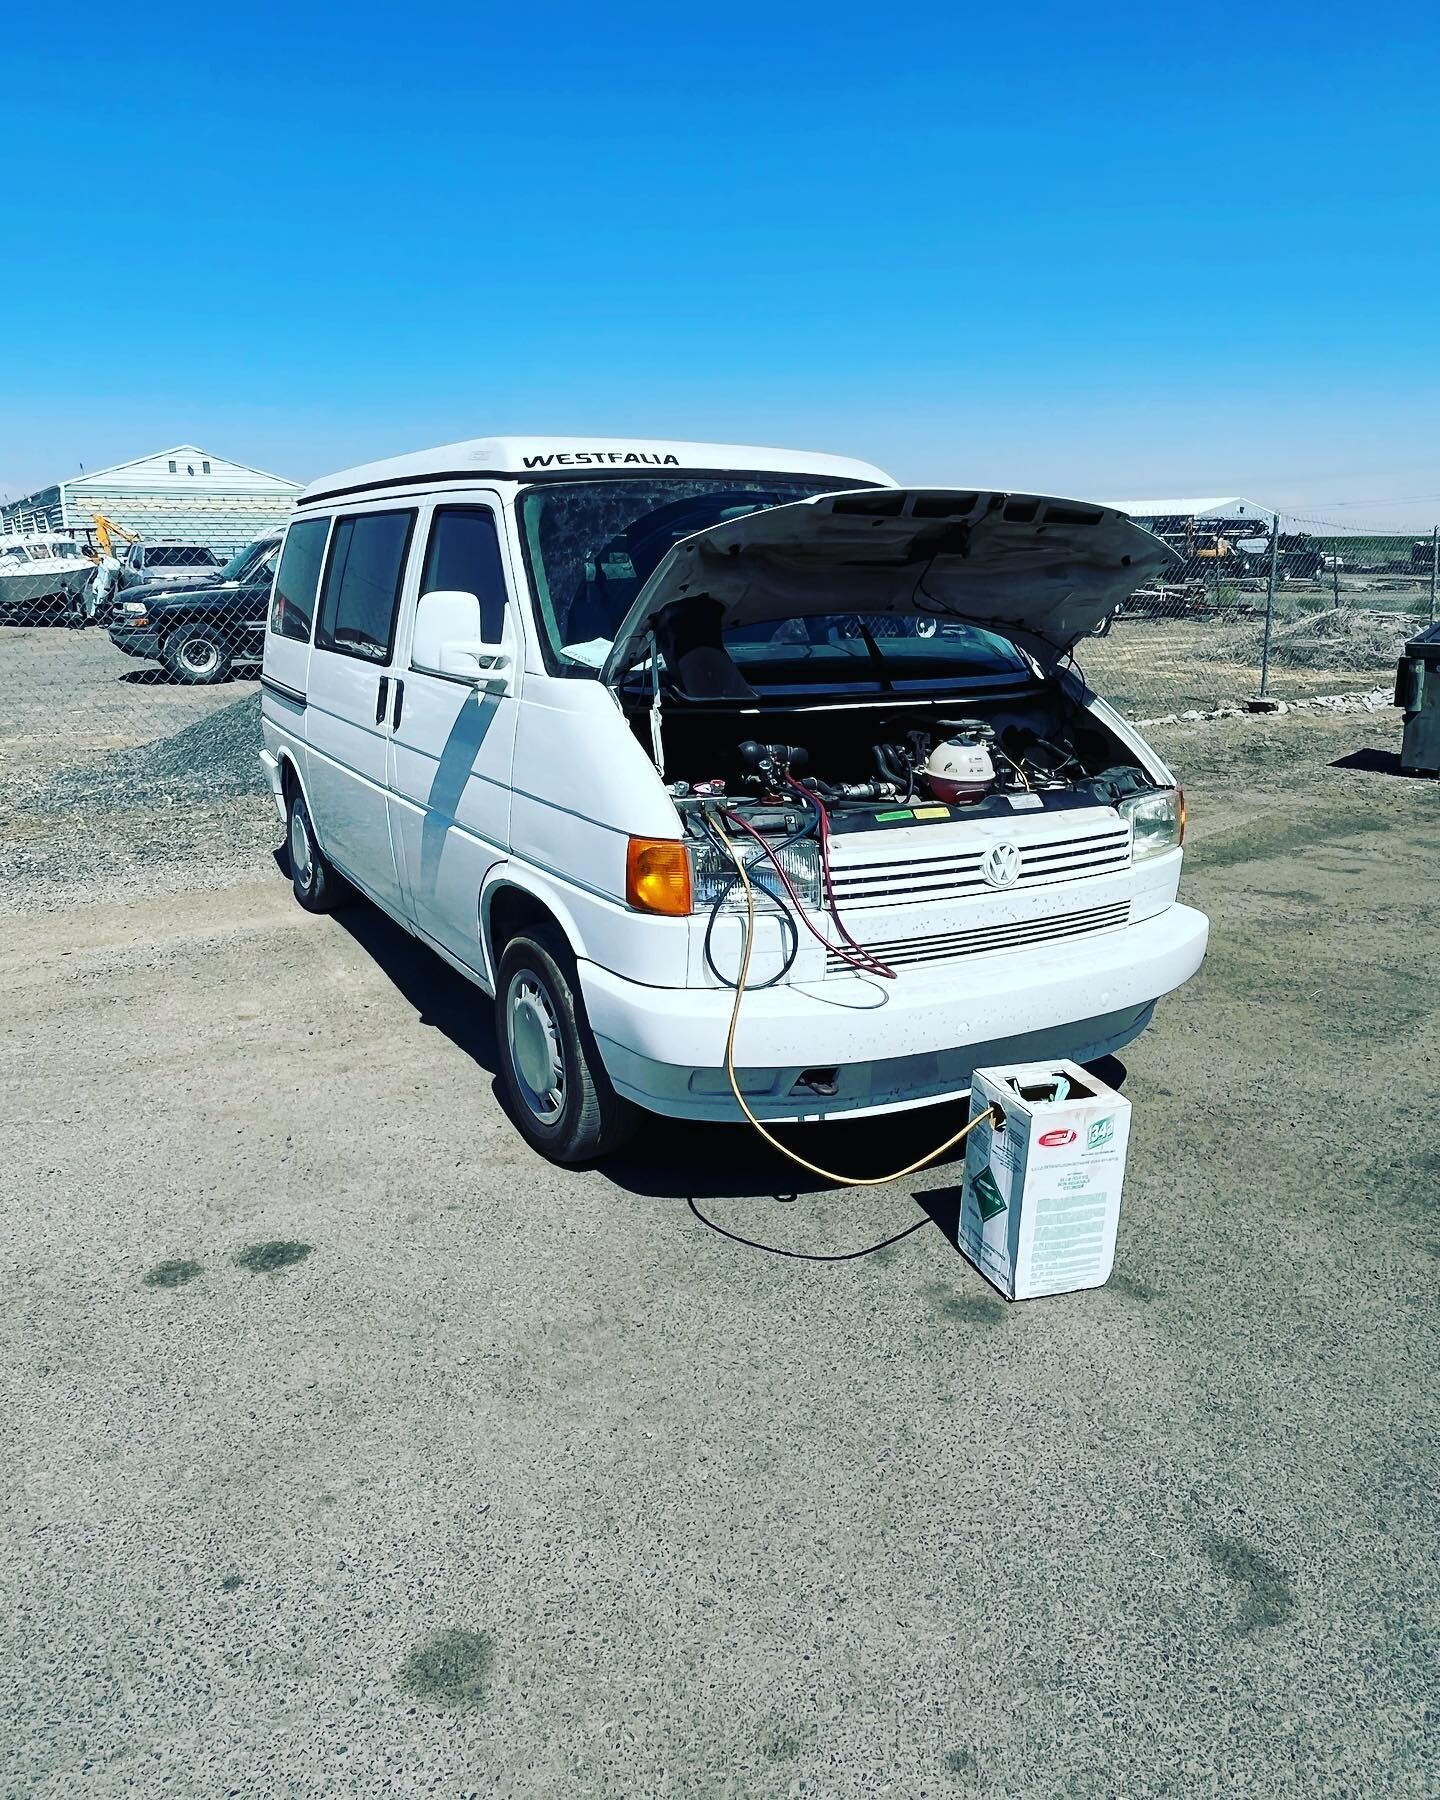 It&rsquo;s hot! We offer Trained and certified A/C service and repair! @roblesomar_ vanagon will be ready to go here soon!  Sweet camping rig!